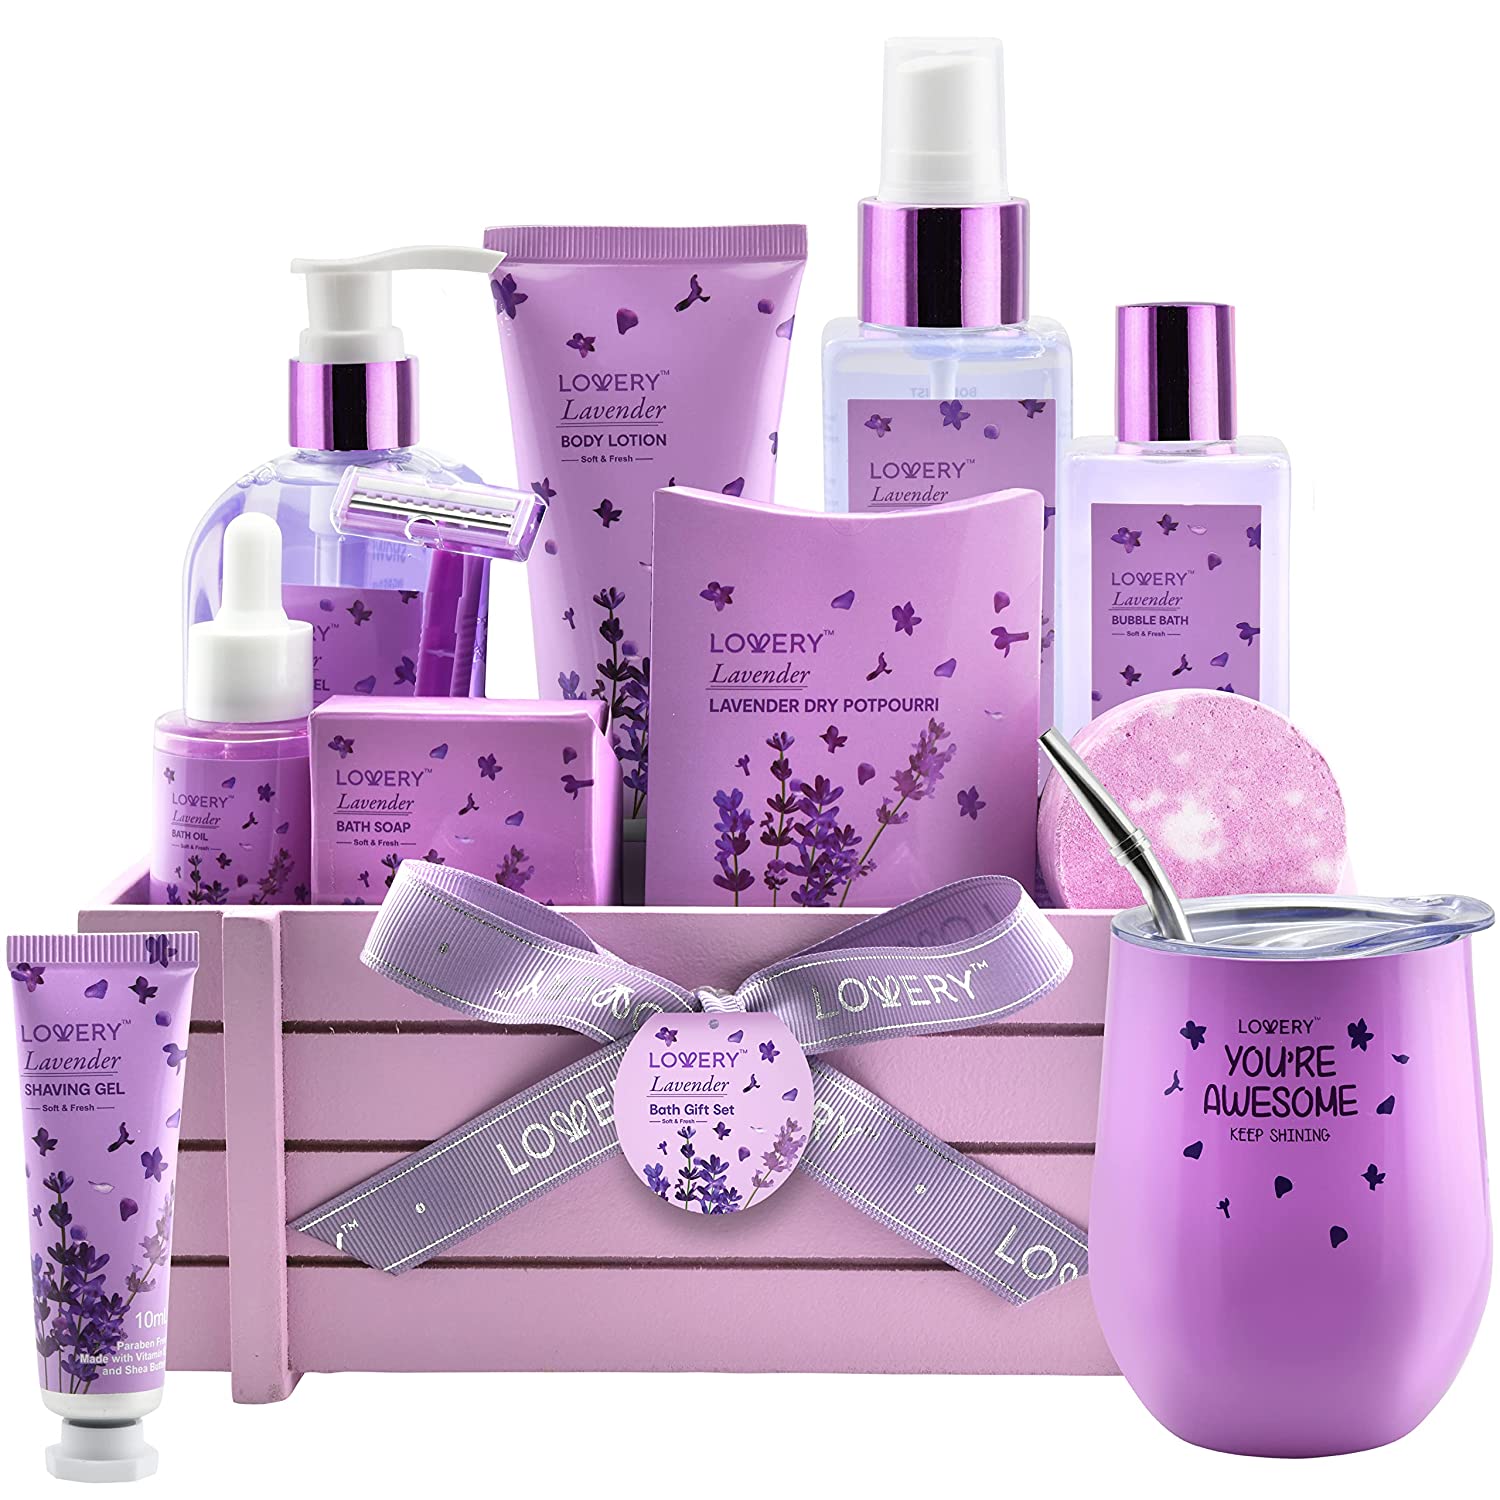 Pampering Vanilla Lavender Luxury Gift Set, Relaxation Gifts for Women,  Body Oil & Spray Custom Scented SPA GIFT Set, Gift Basket for Moms